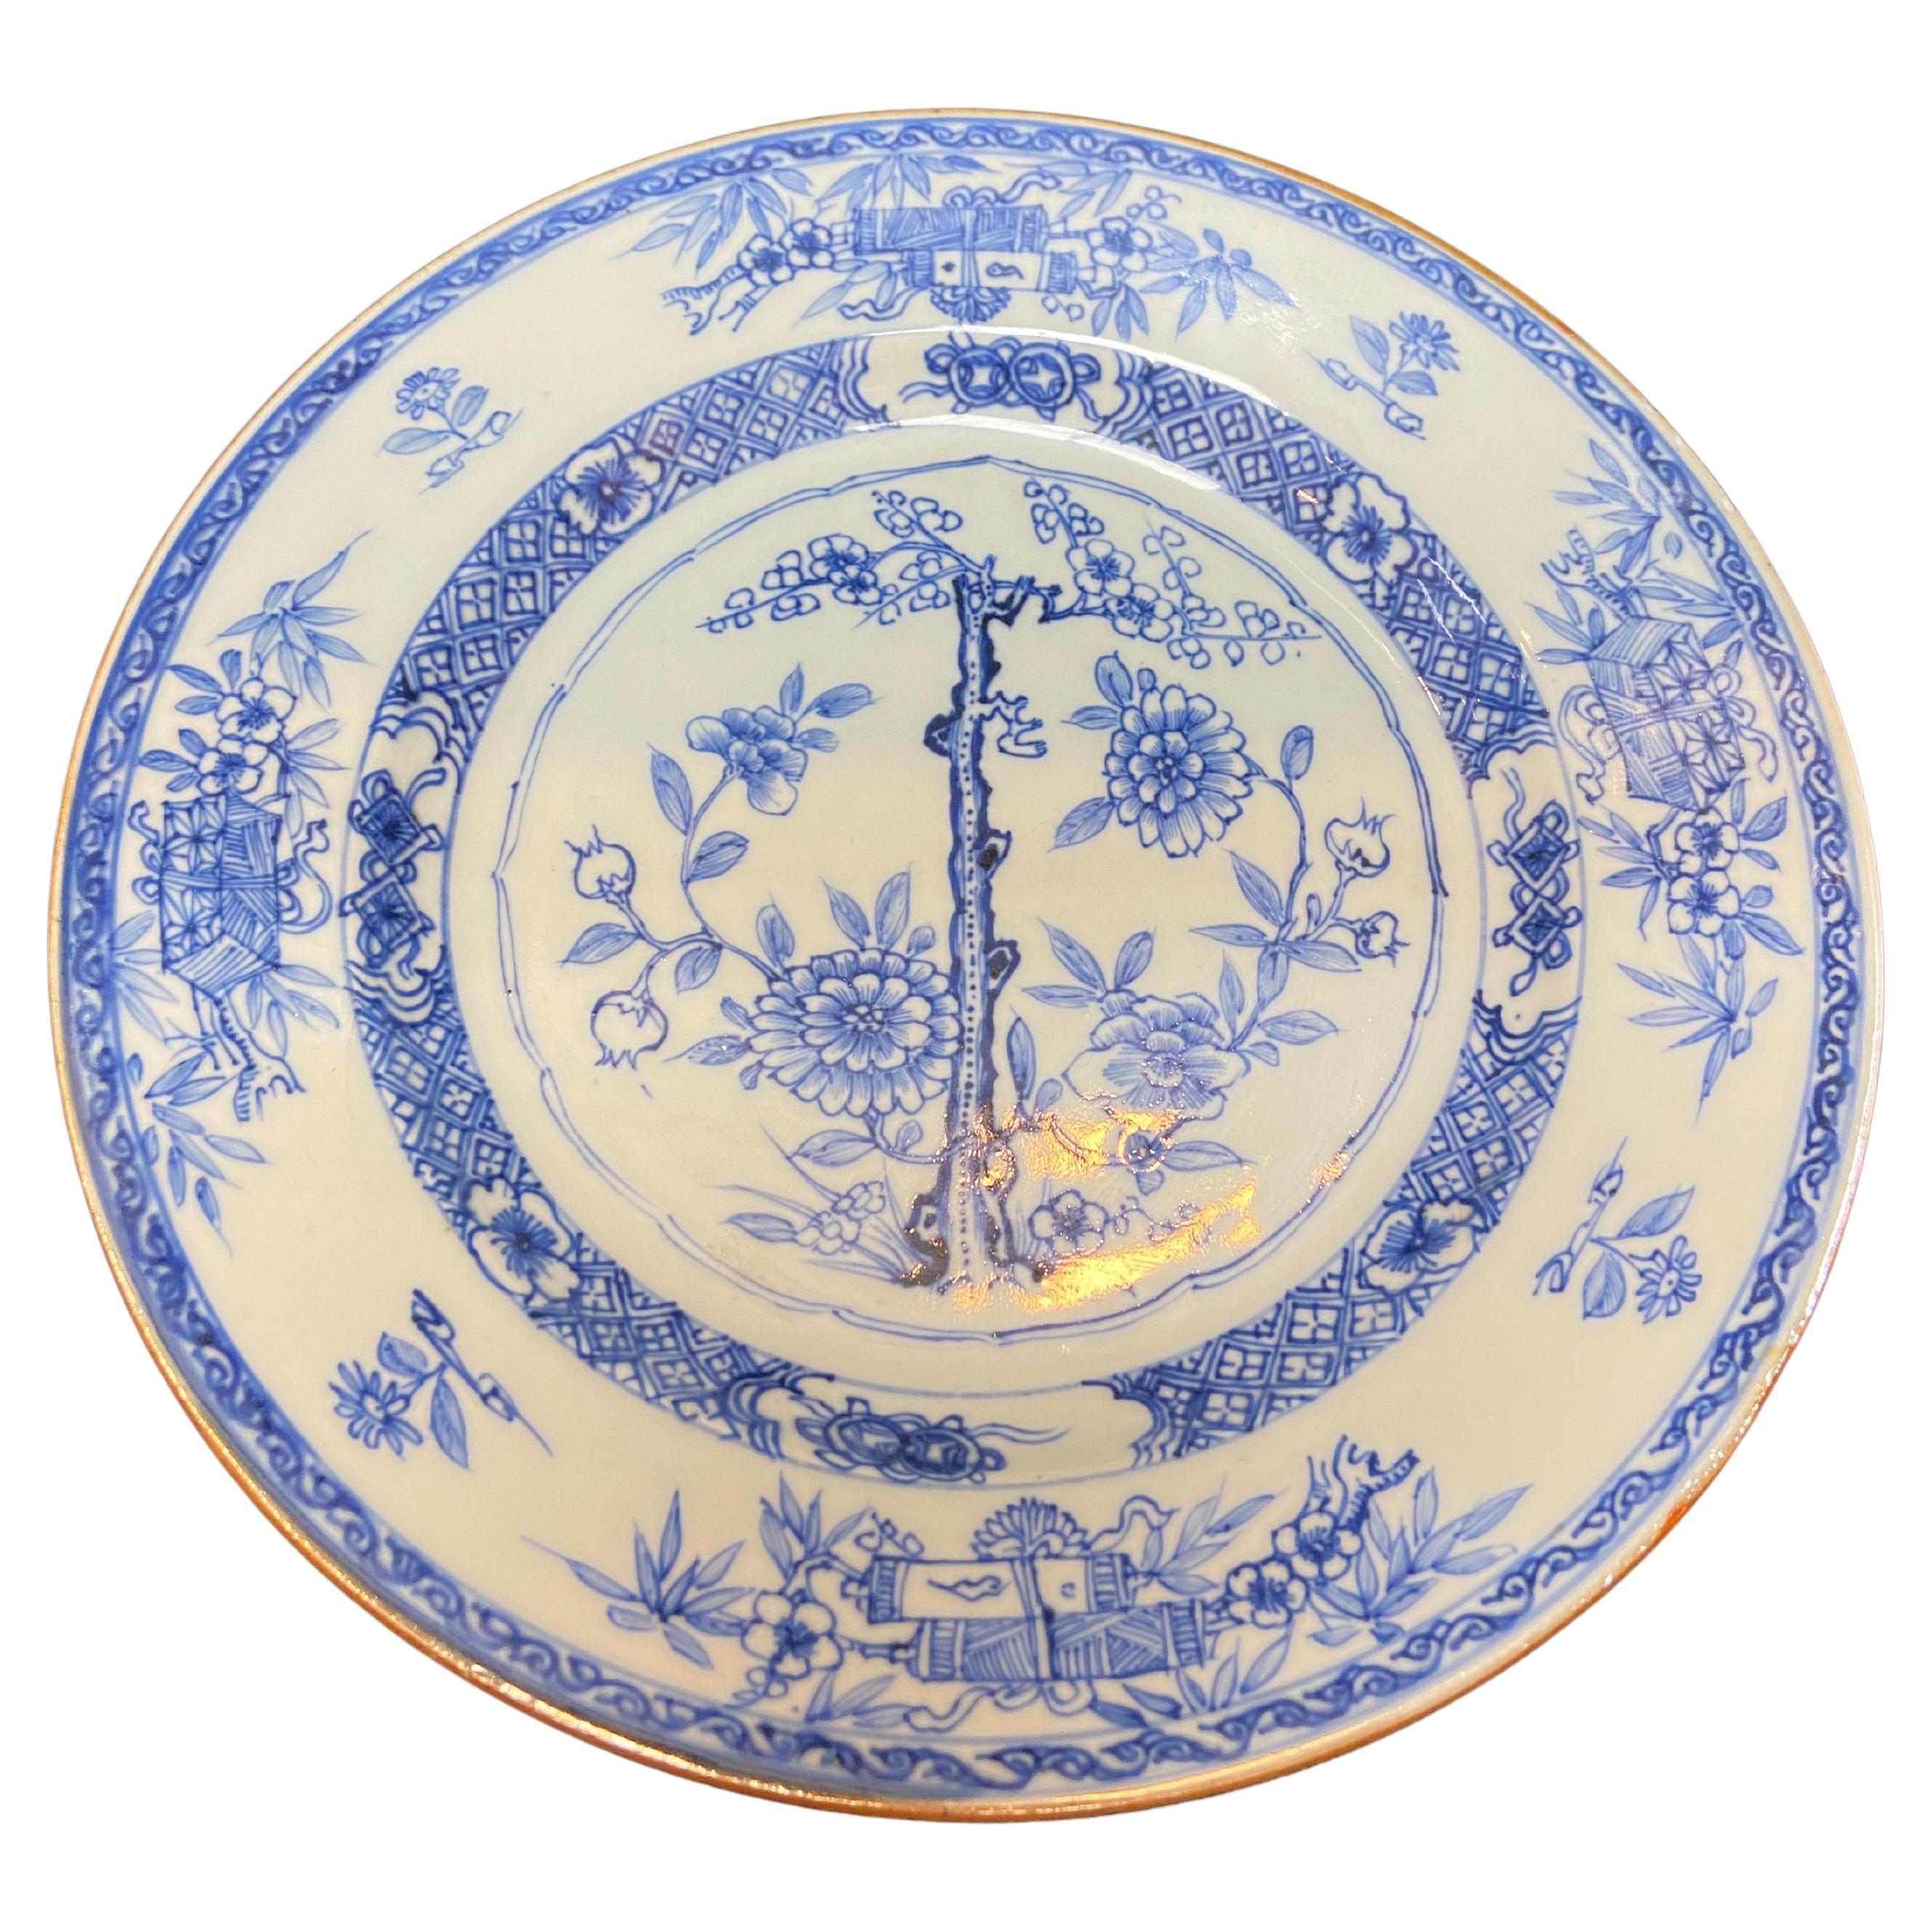 Qing， Qianlong Period blue and white “Flowers” dish